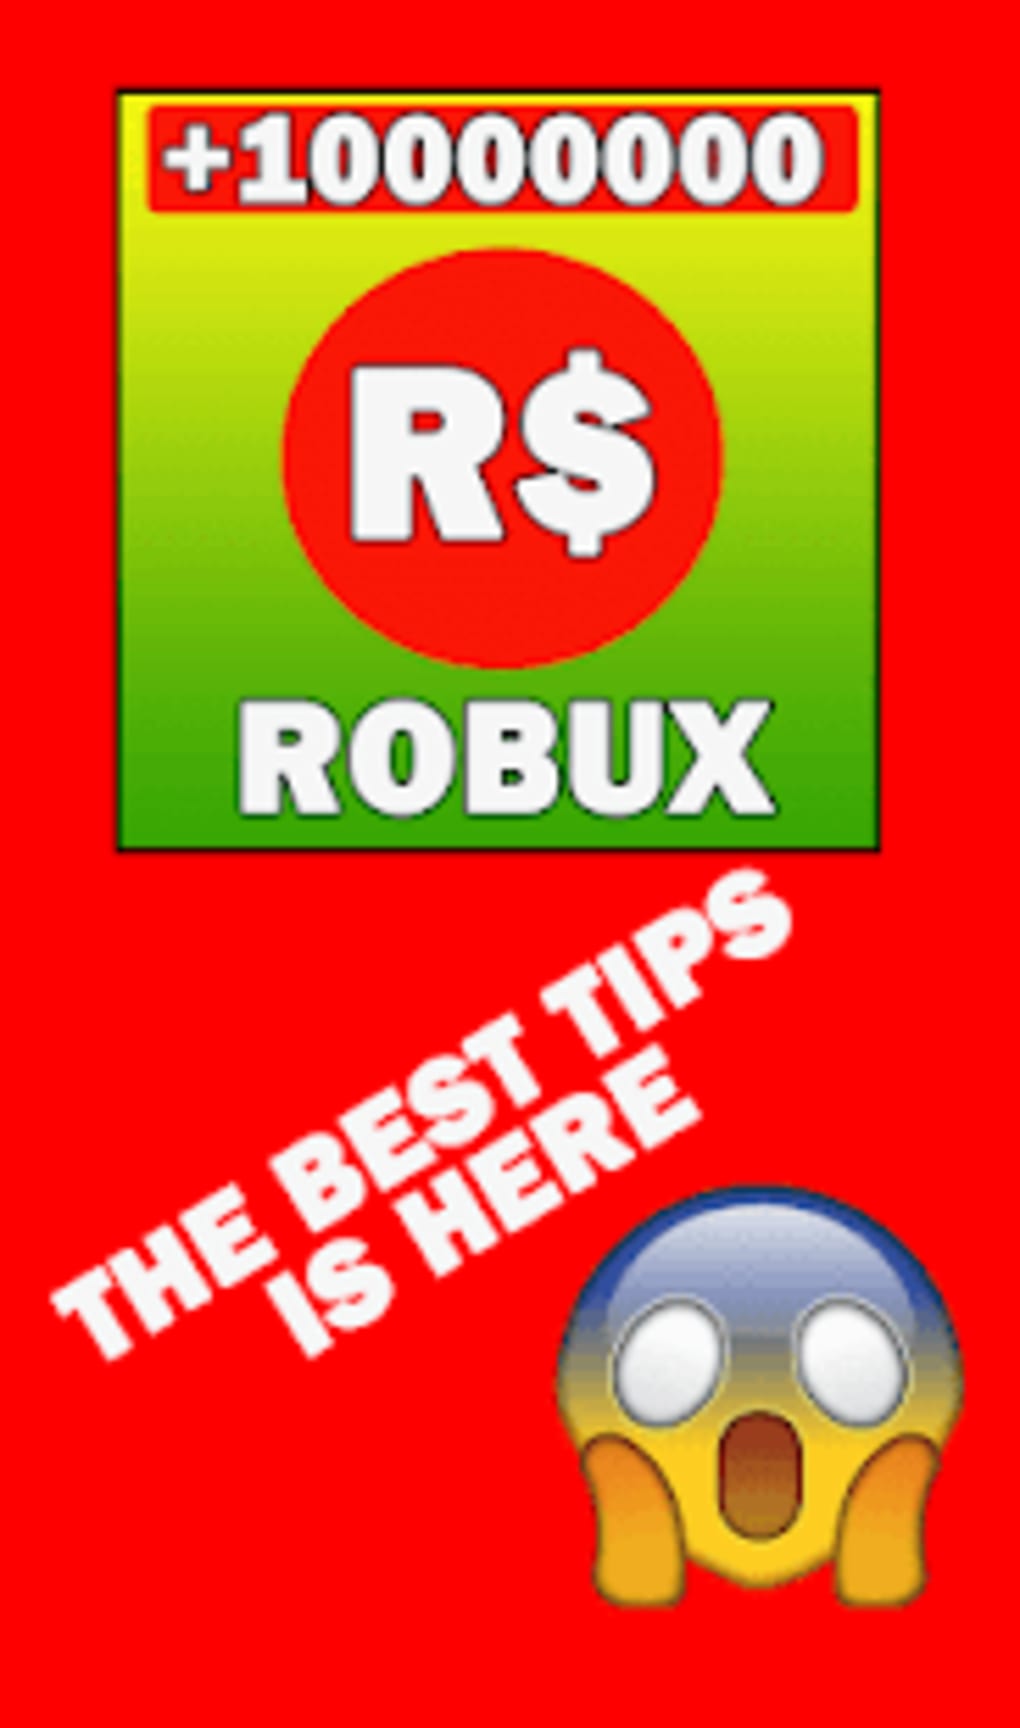 Get Free Robux Tips Get Robux Free 2k19 For Android Download - download get free robux guide ultimate new tips 2019